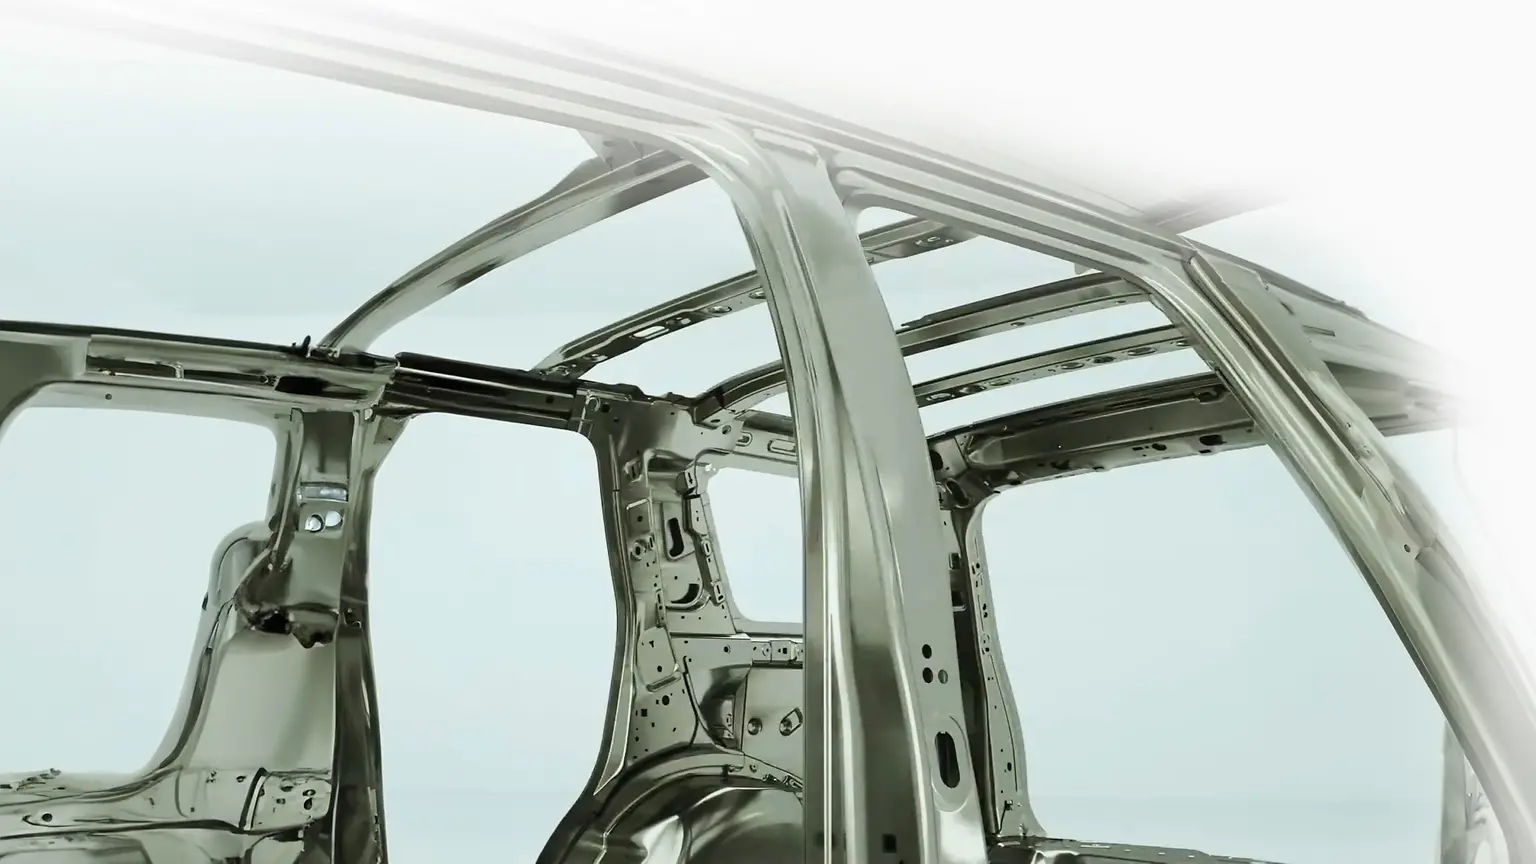 
Henkel structural adhesives to replace welding, such as in cabin assembly, can enable lightweighting, reduced material consumption and a carbon footprint reduction up to 15%. 